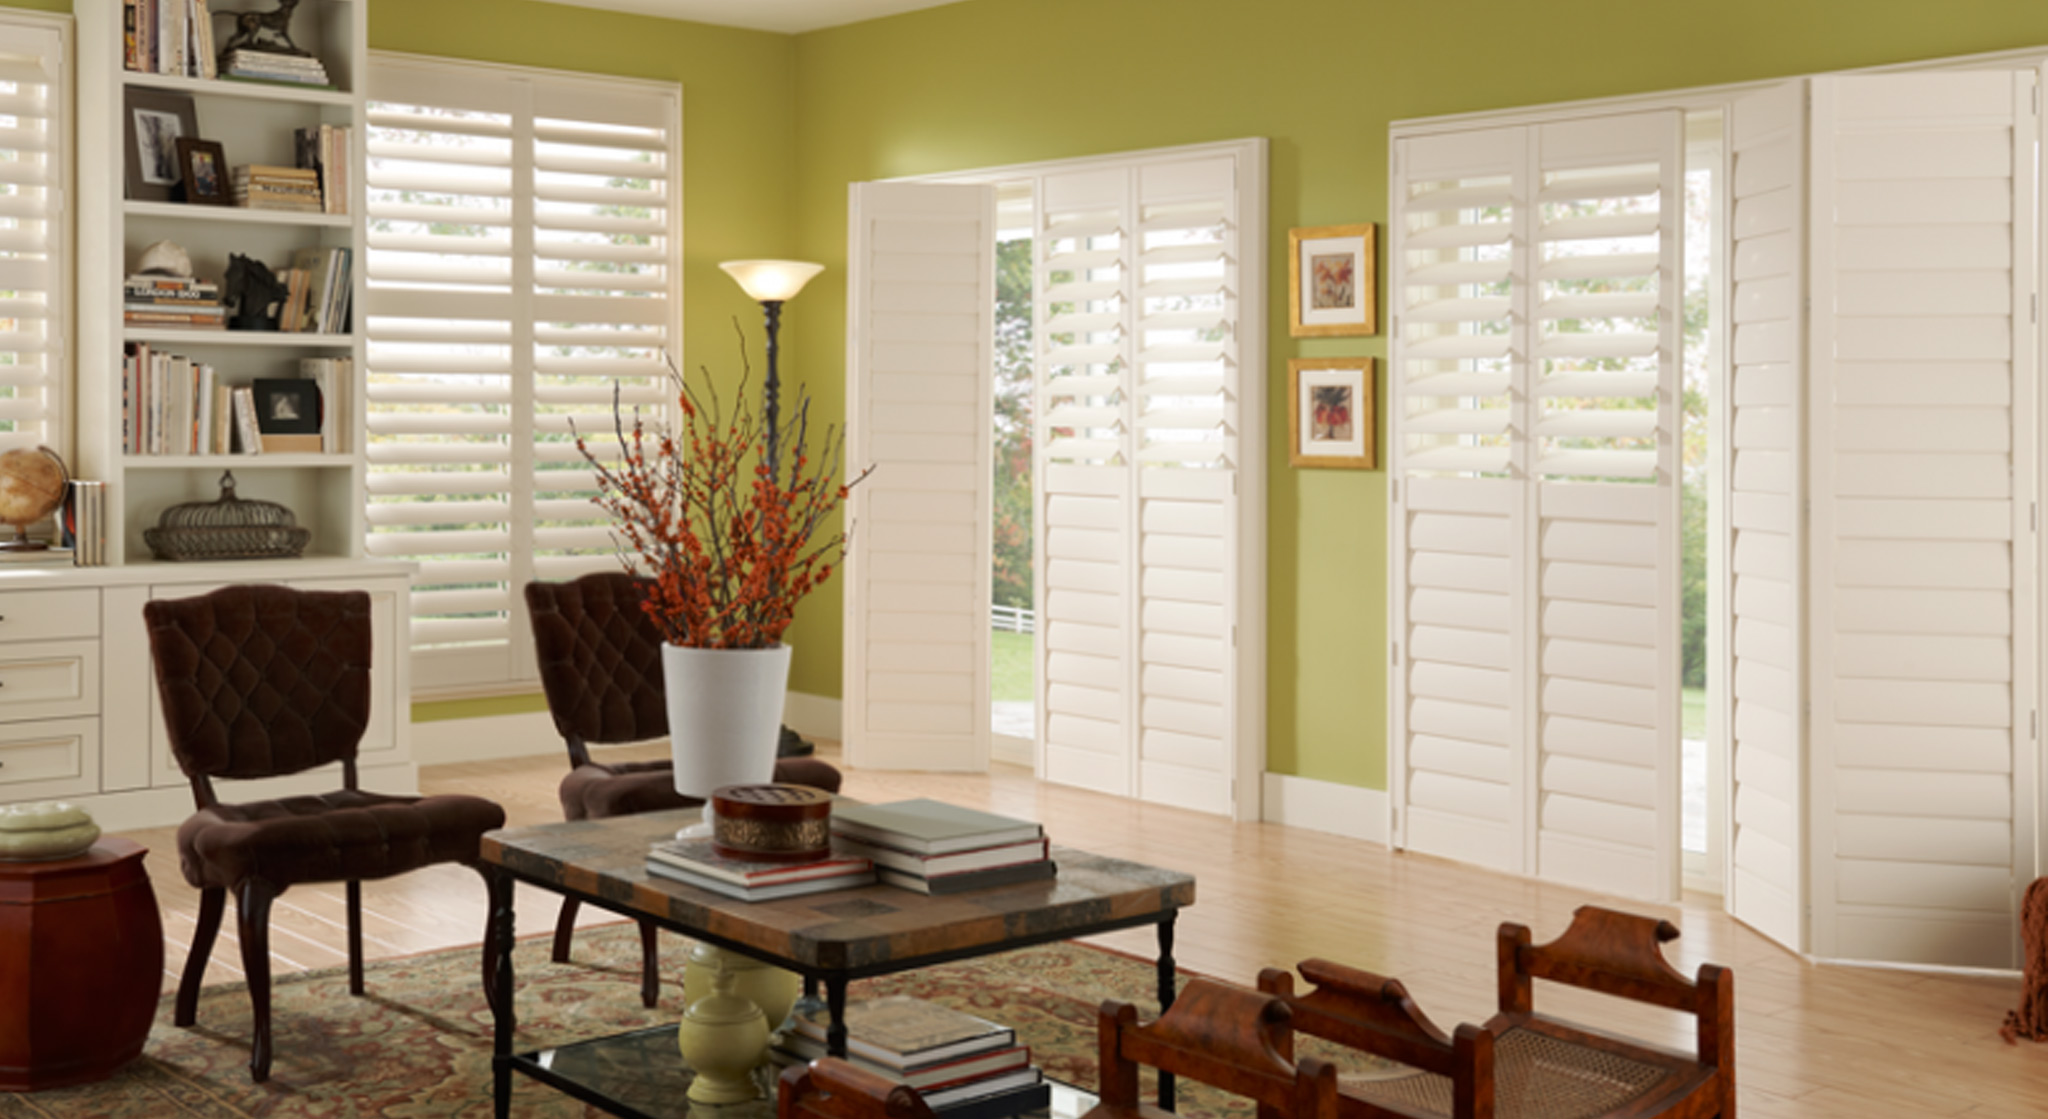 What Should I Consider When Selecting Motorized Blinds?